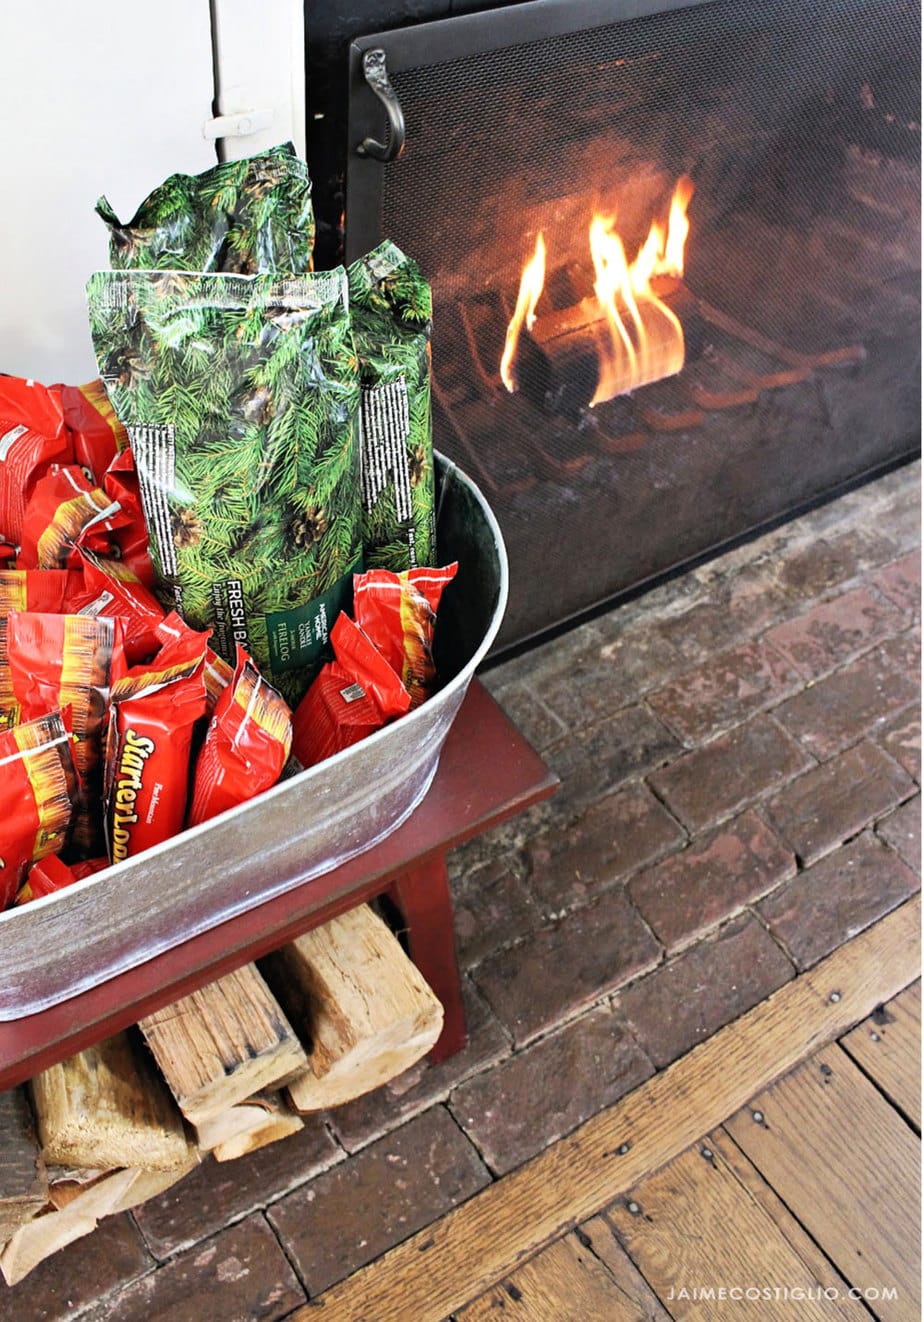 Yankee Fireplace Inspirational Hearth In the Home Fire Starters and Fire Logs Jaime Costiglio